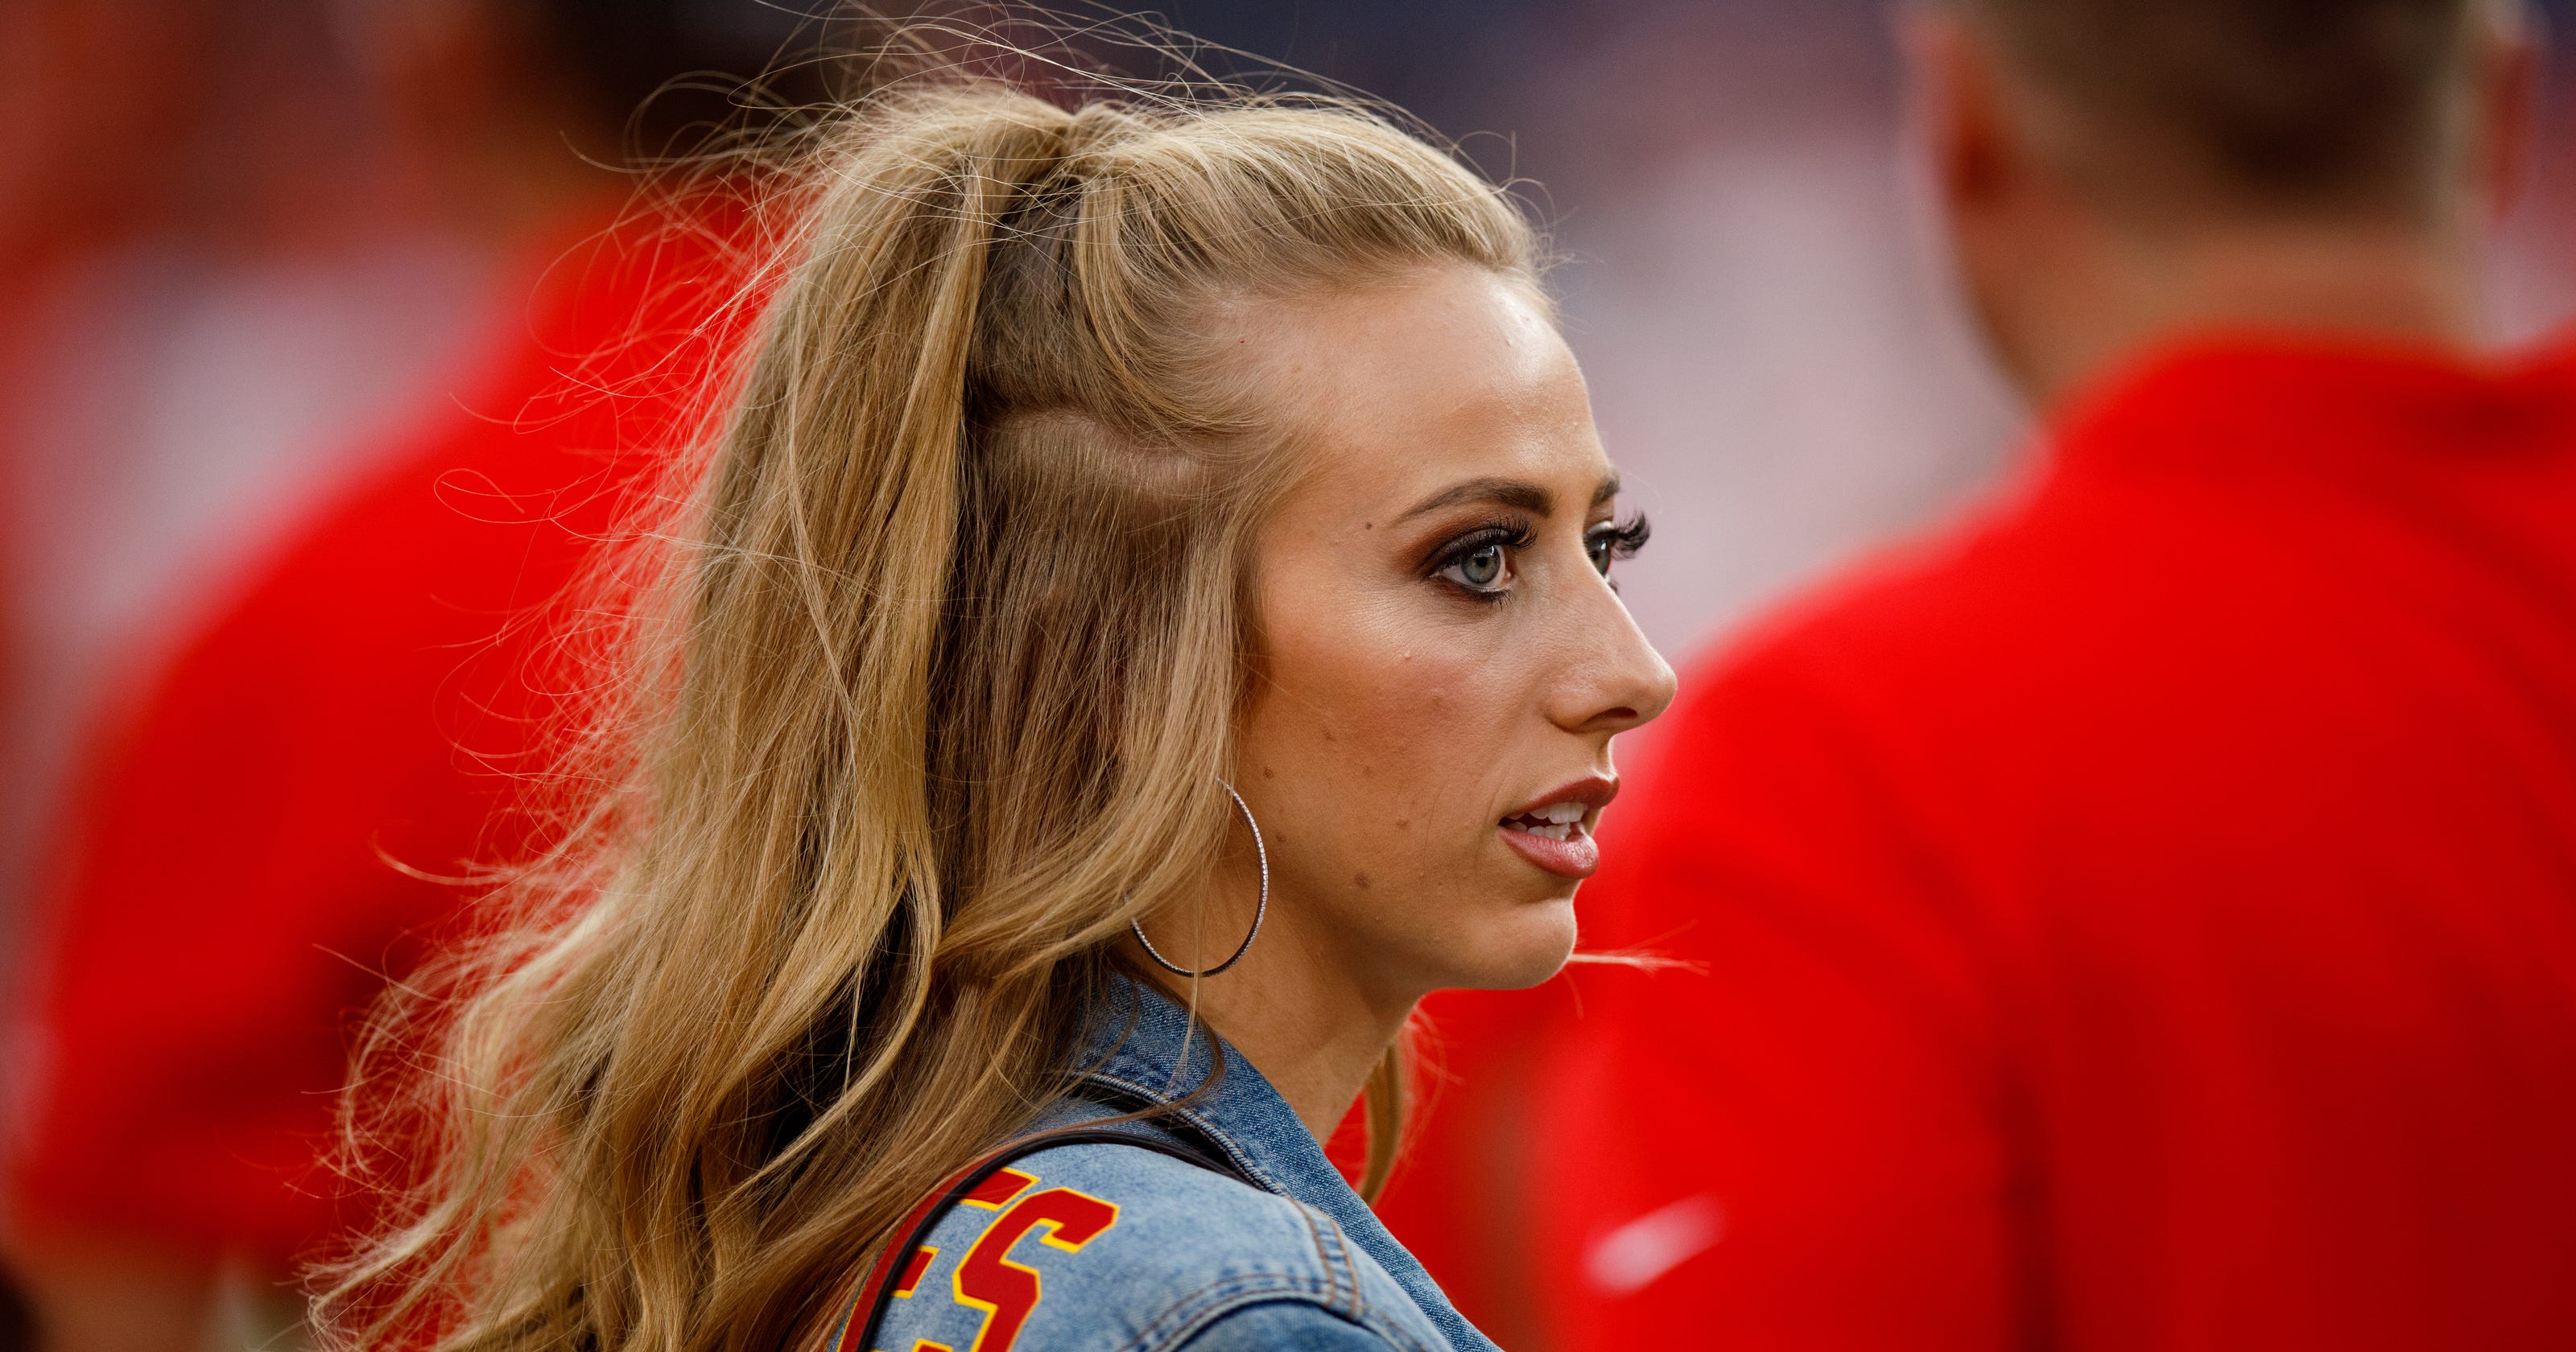 Patrick Mahomes' girlfriend: Fans harassed her at Chiefs-Patriots game